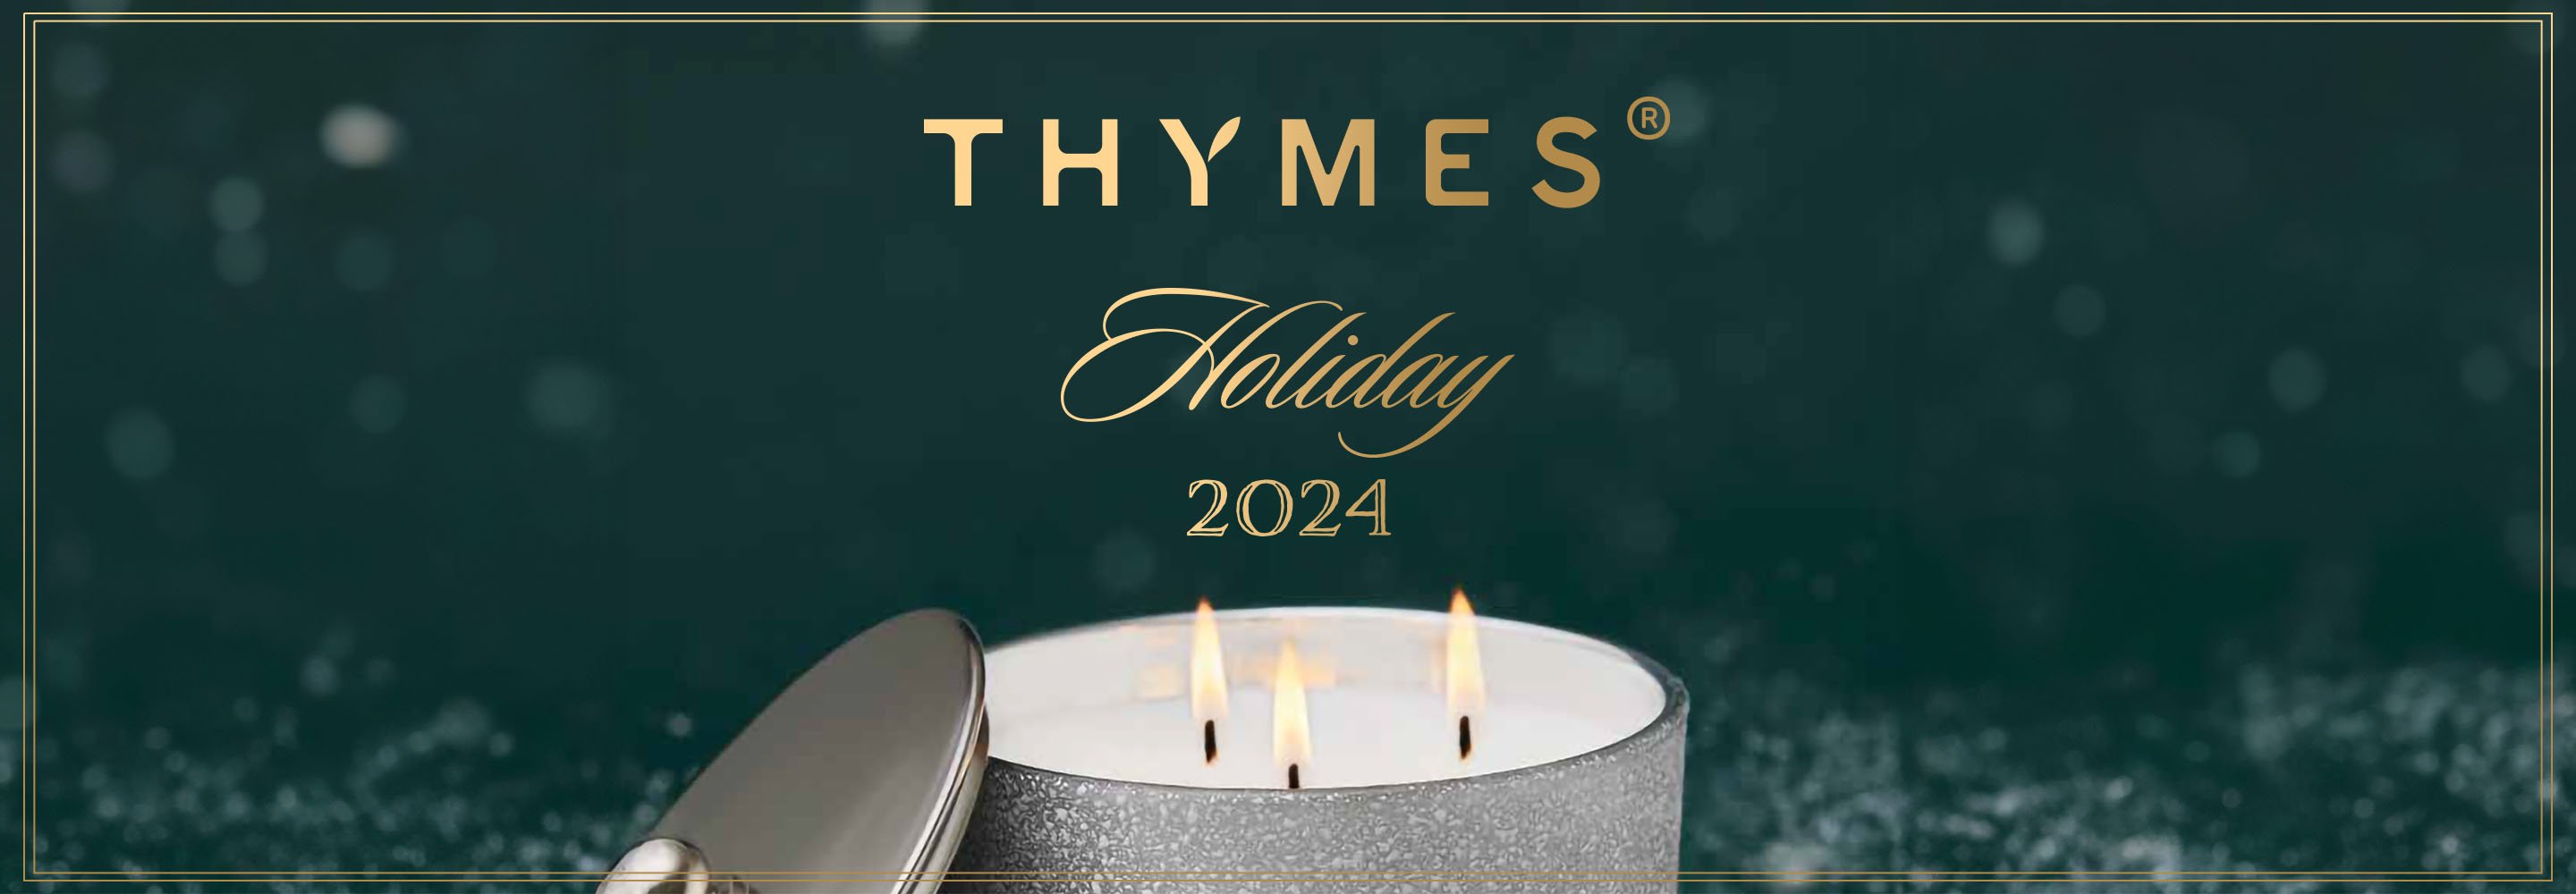 Thymes 2024 Holiday Early Buy